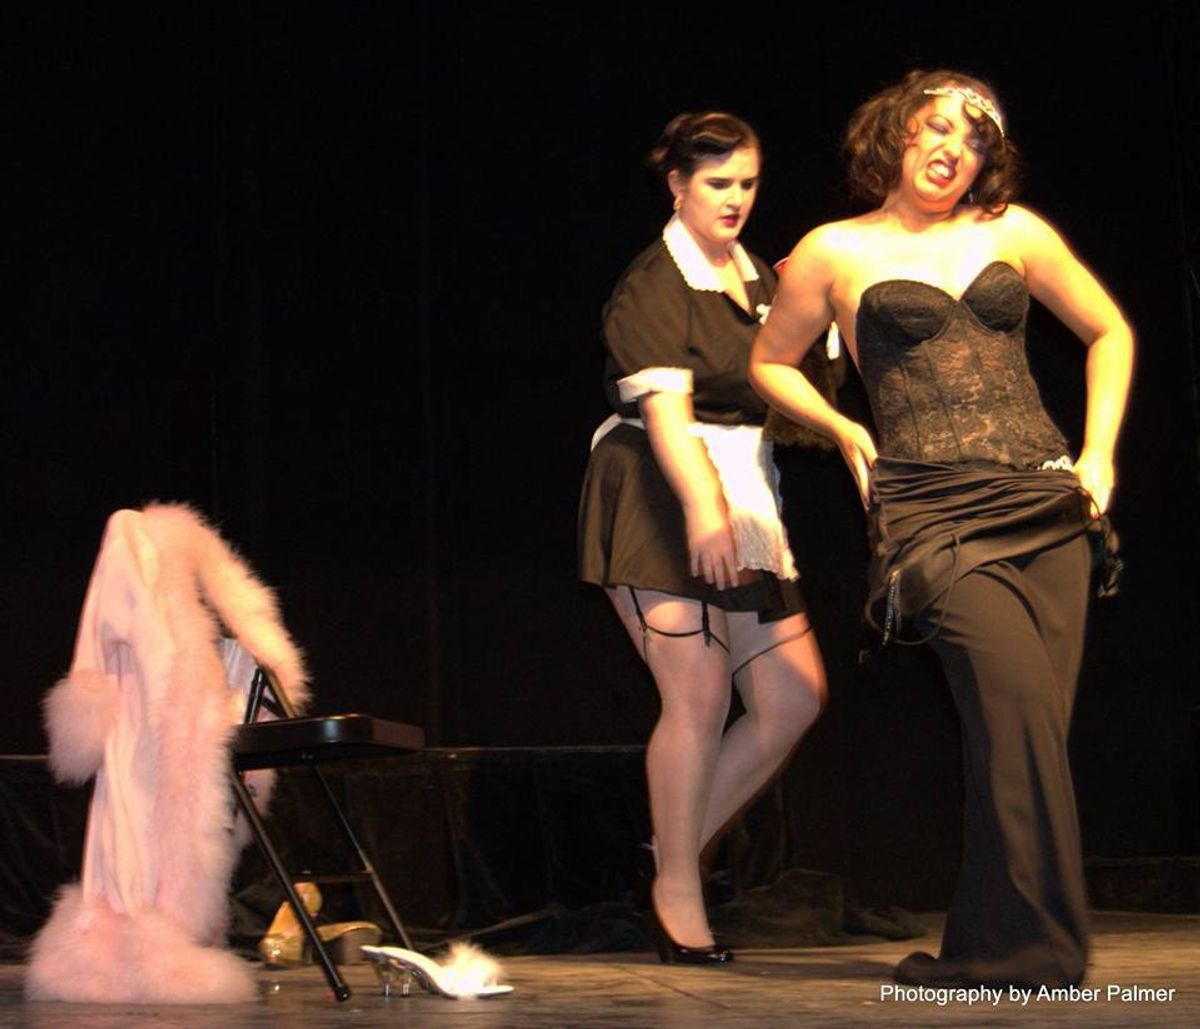 My First Taste Of Competitive Burlesque